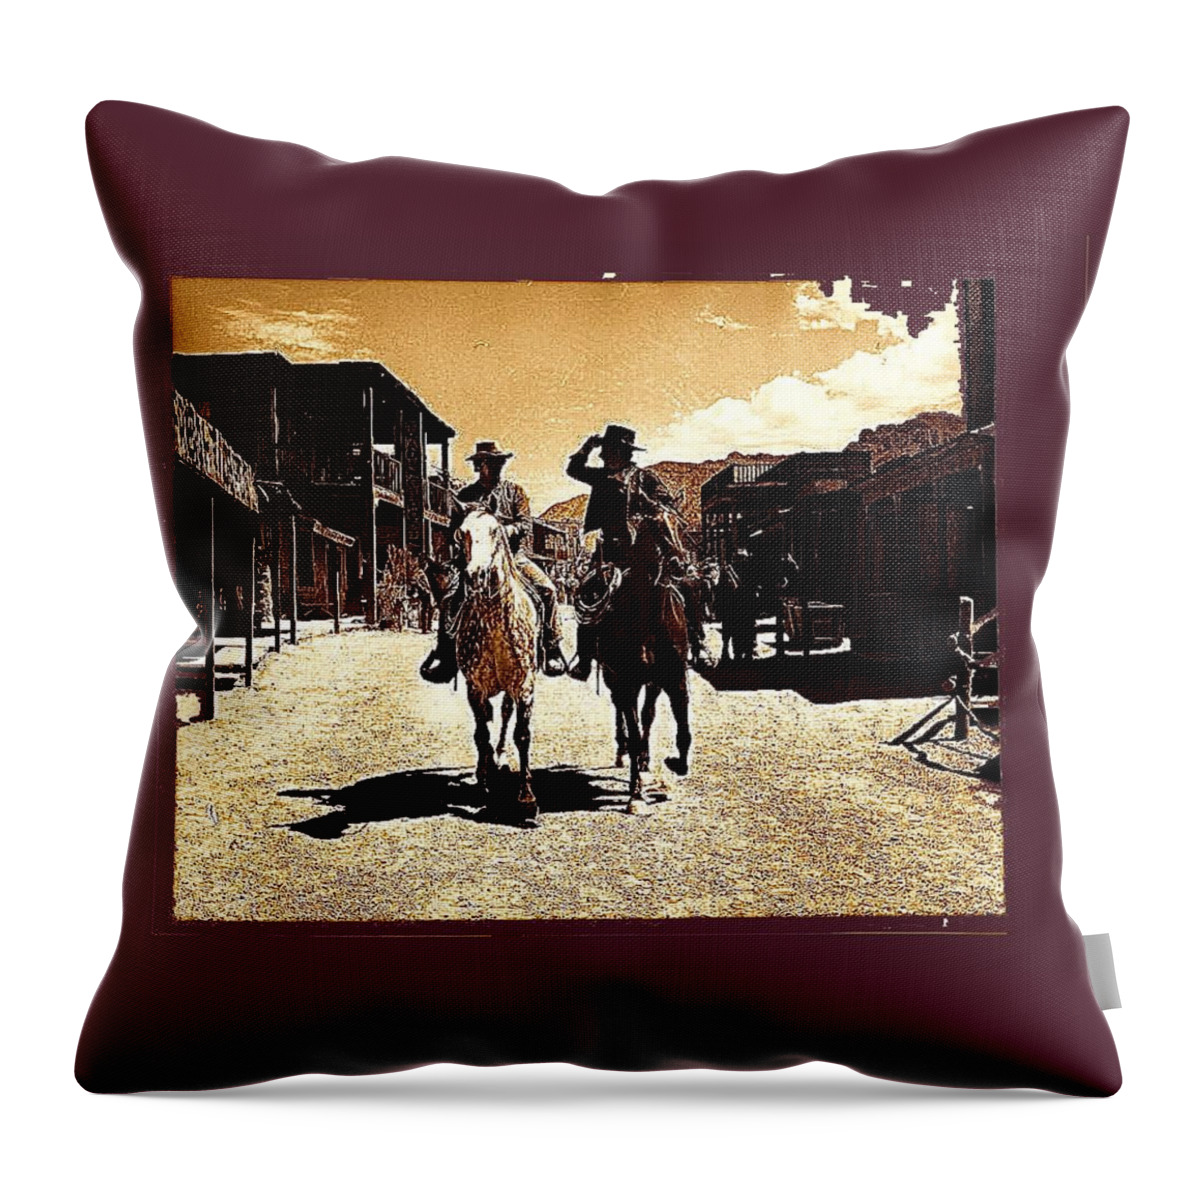 Film Homage Mark Slade Cameron Mitchell Riding Horses The High Chaparral Old Tucson Arizona Throw Pillow featuring the photograph Film Homage Mark Slade Cameron Mitchell Riding Horses The High Chaparral Old Tucson AZ c.1967-2013 by David Lee Guss